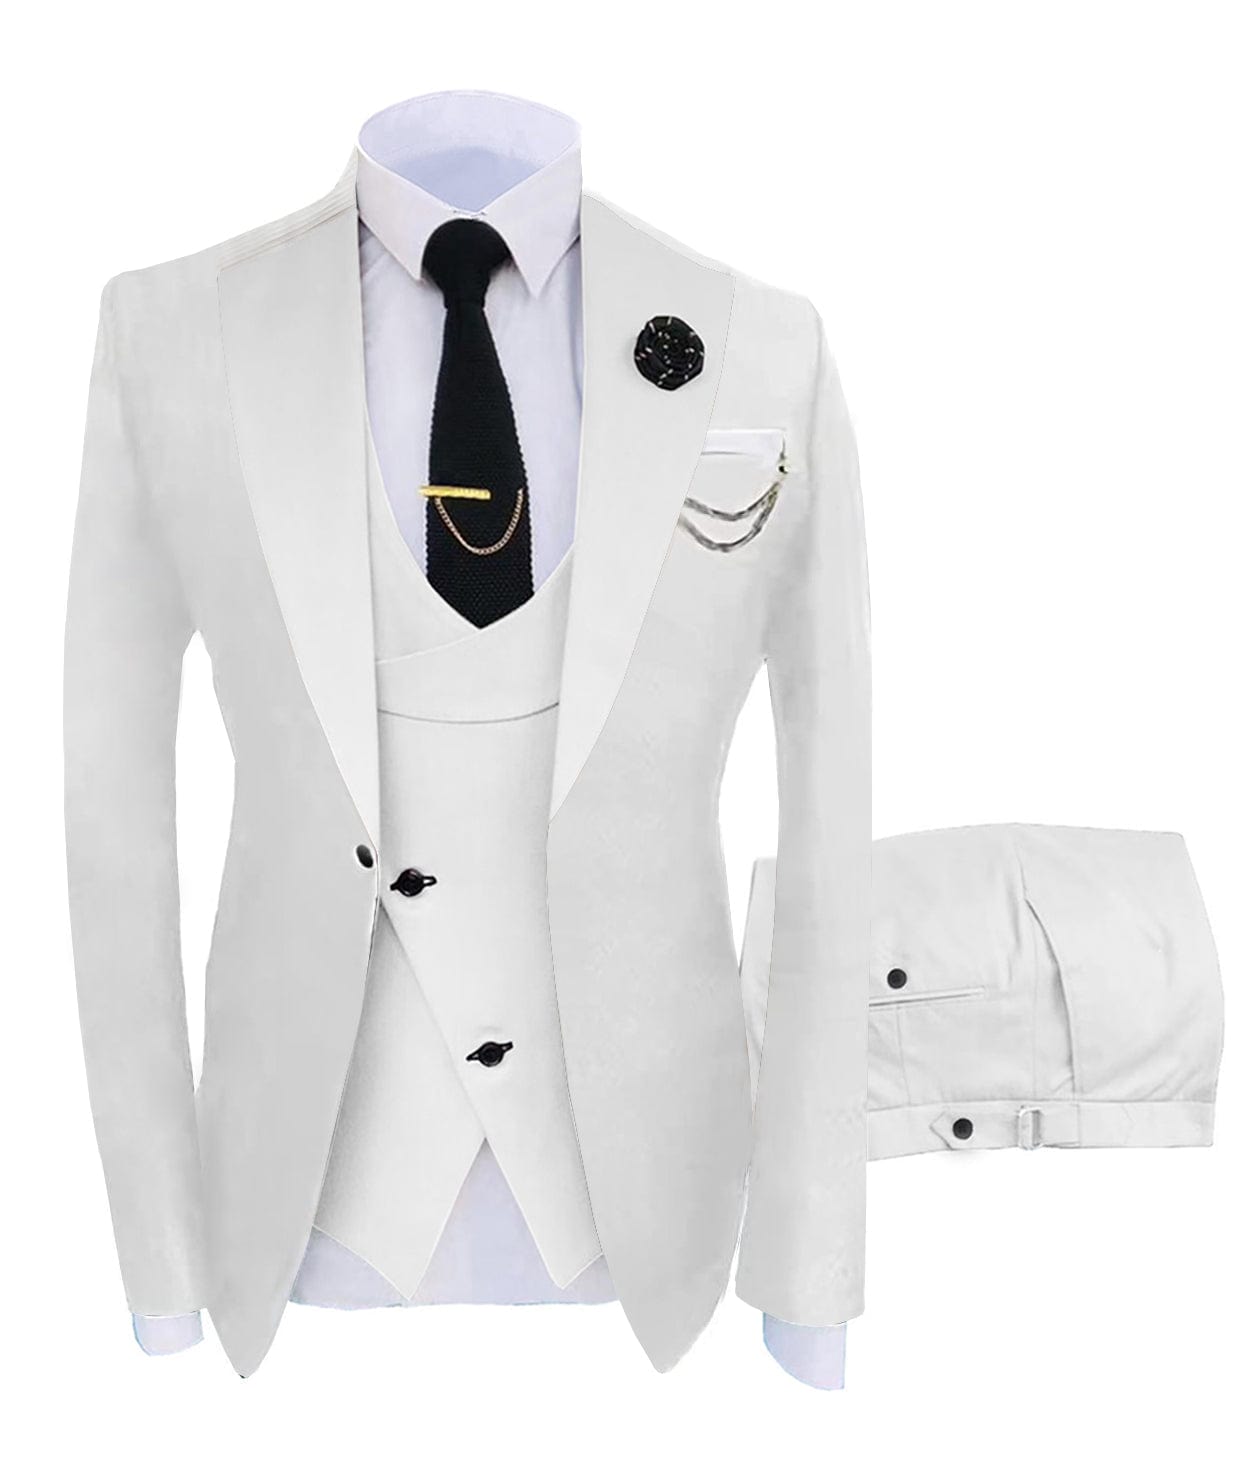 Buy Men Suits 3 Piece Designer Tuxedo White and Black Style Suits Wedding  Party Suits Elegant Suits Formal Fashion Suits Stylish Bespoke for Men  Online in India… | Black and white suit,